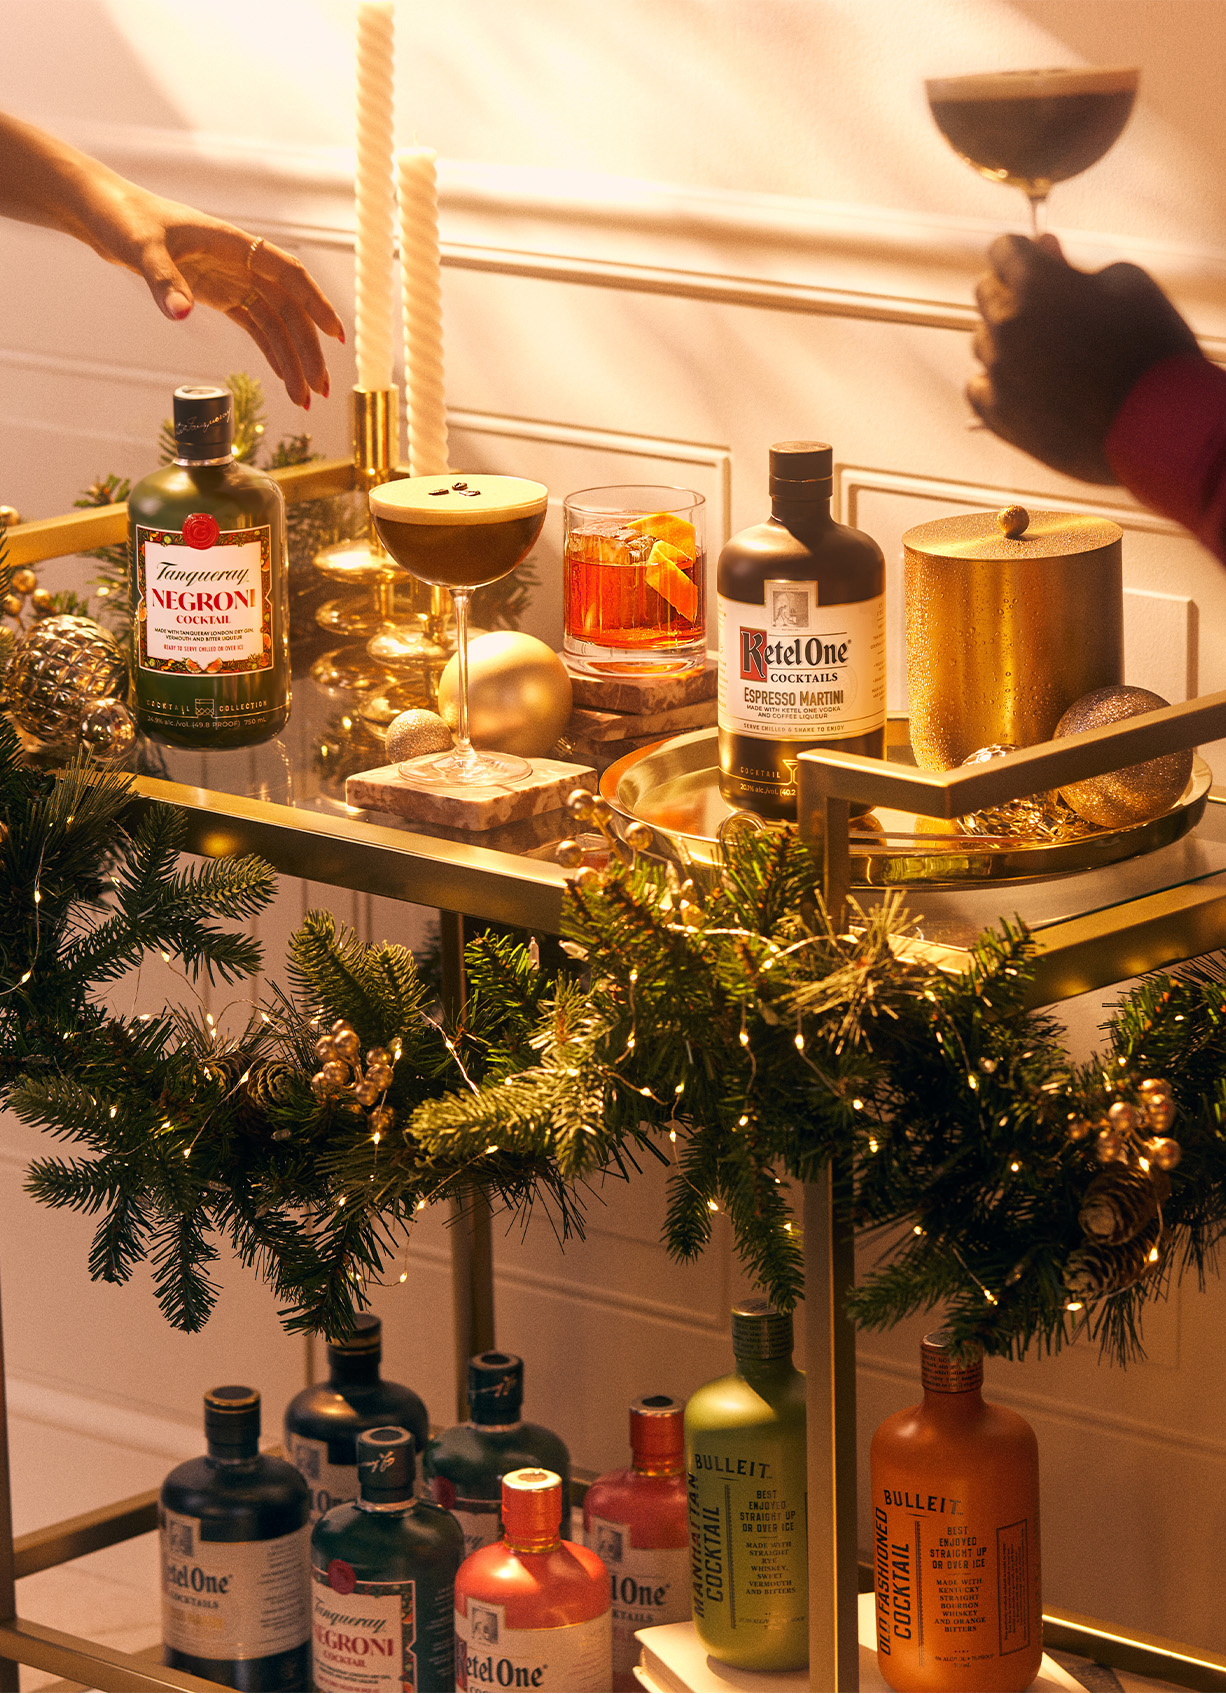 Festive Holiday Bar Cart Featuring Classic Cocktails from The Cocktail Collection